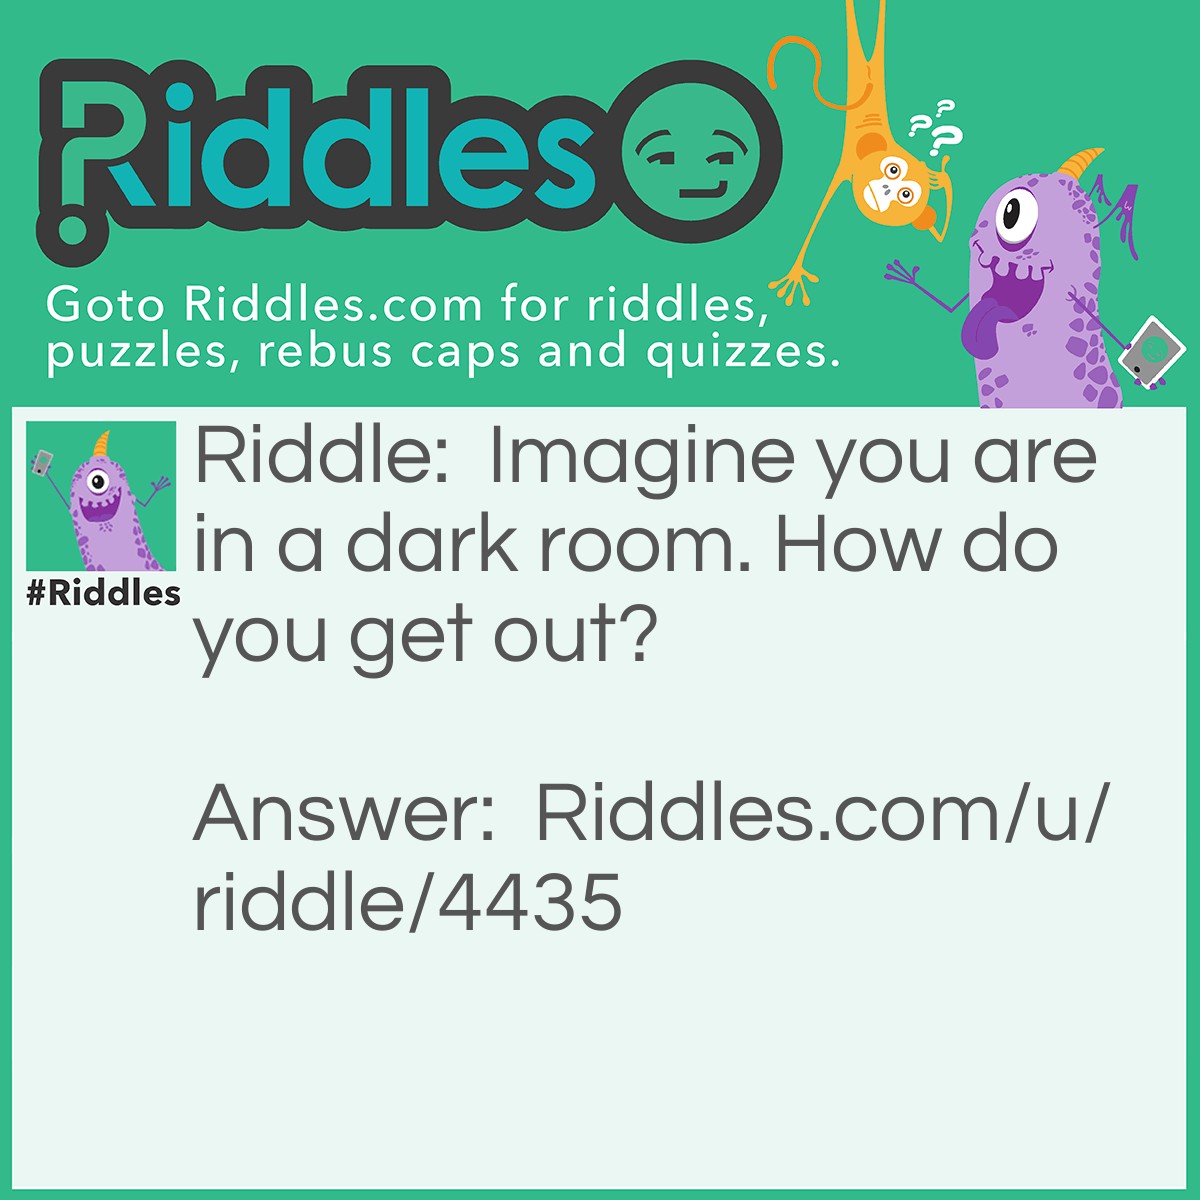 Riddle: Imagine you are in a dark room. How do you get out? Answer: Stop Imagining.